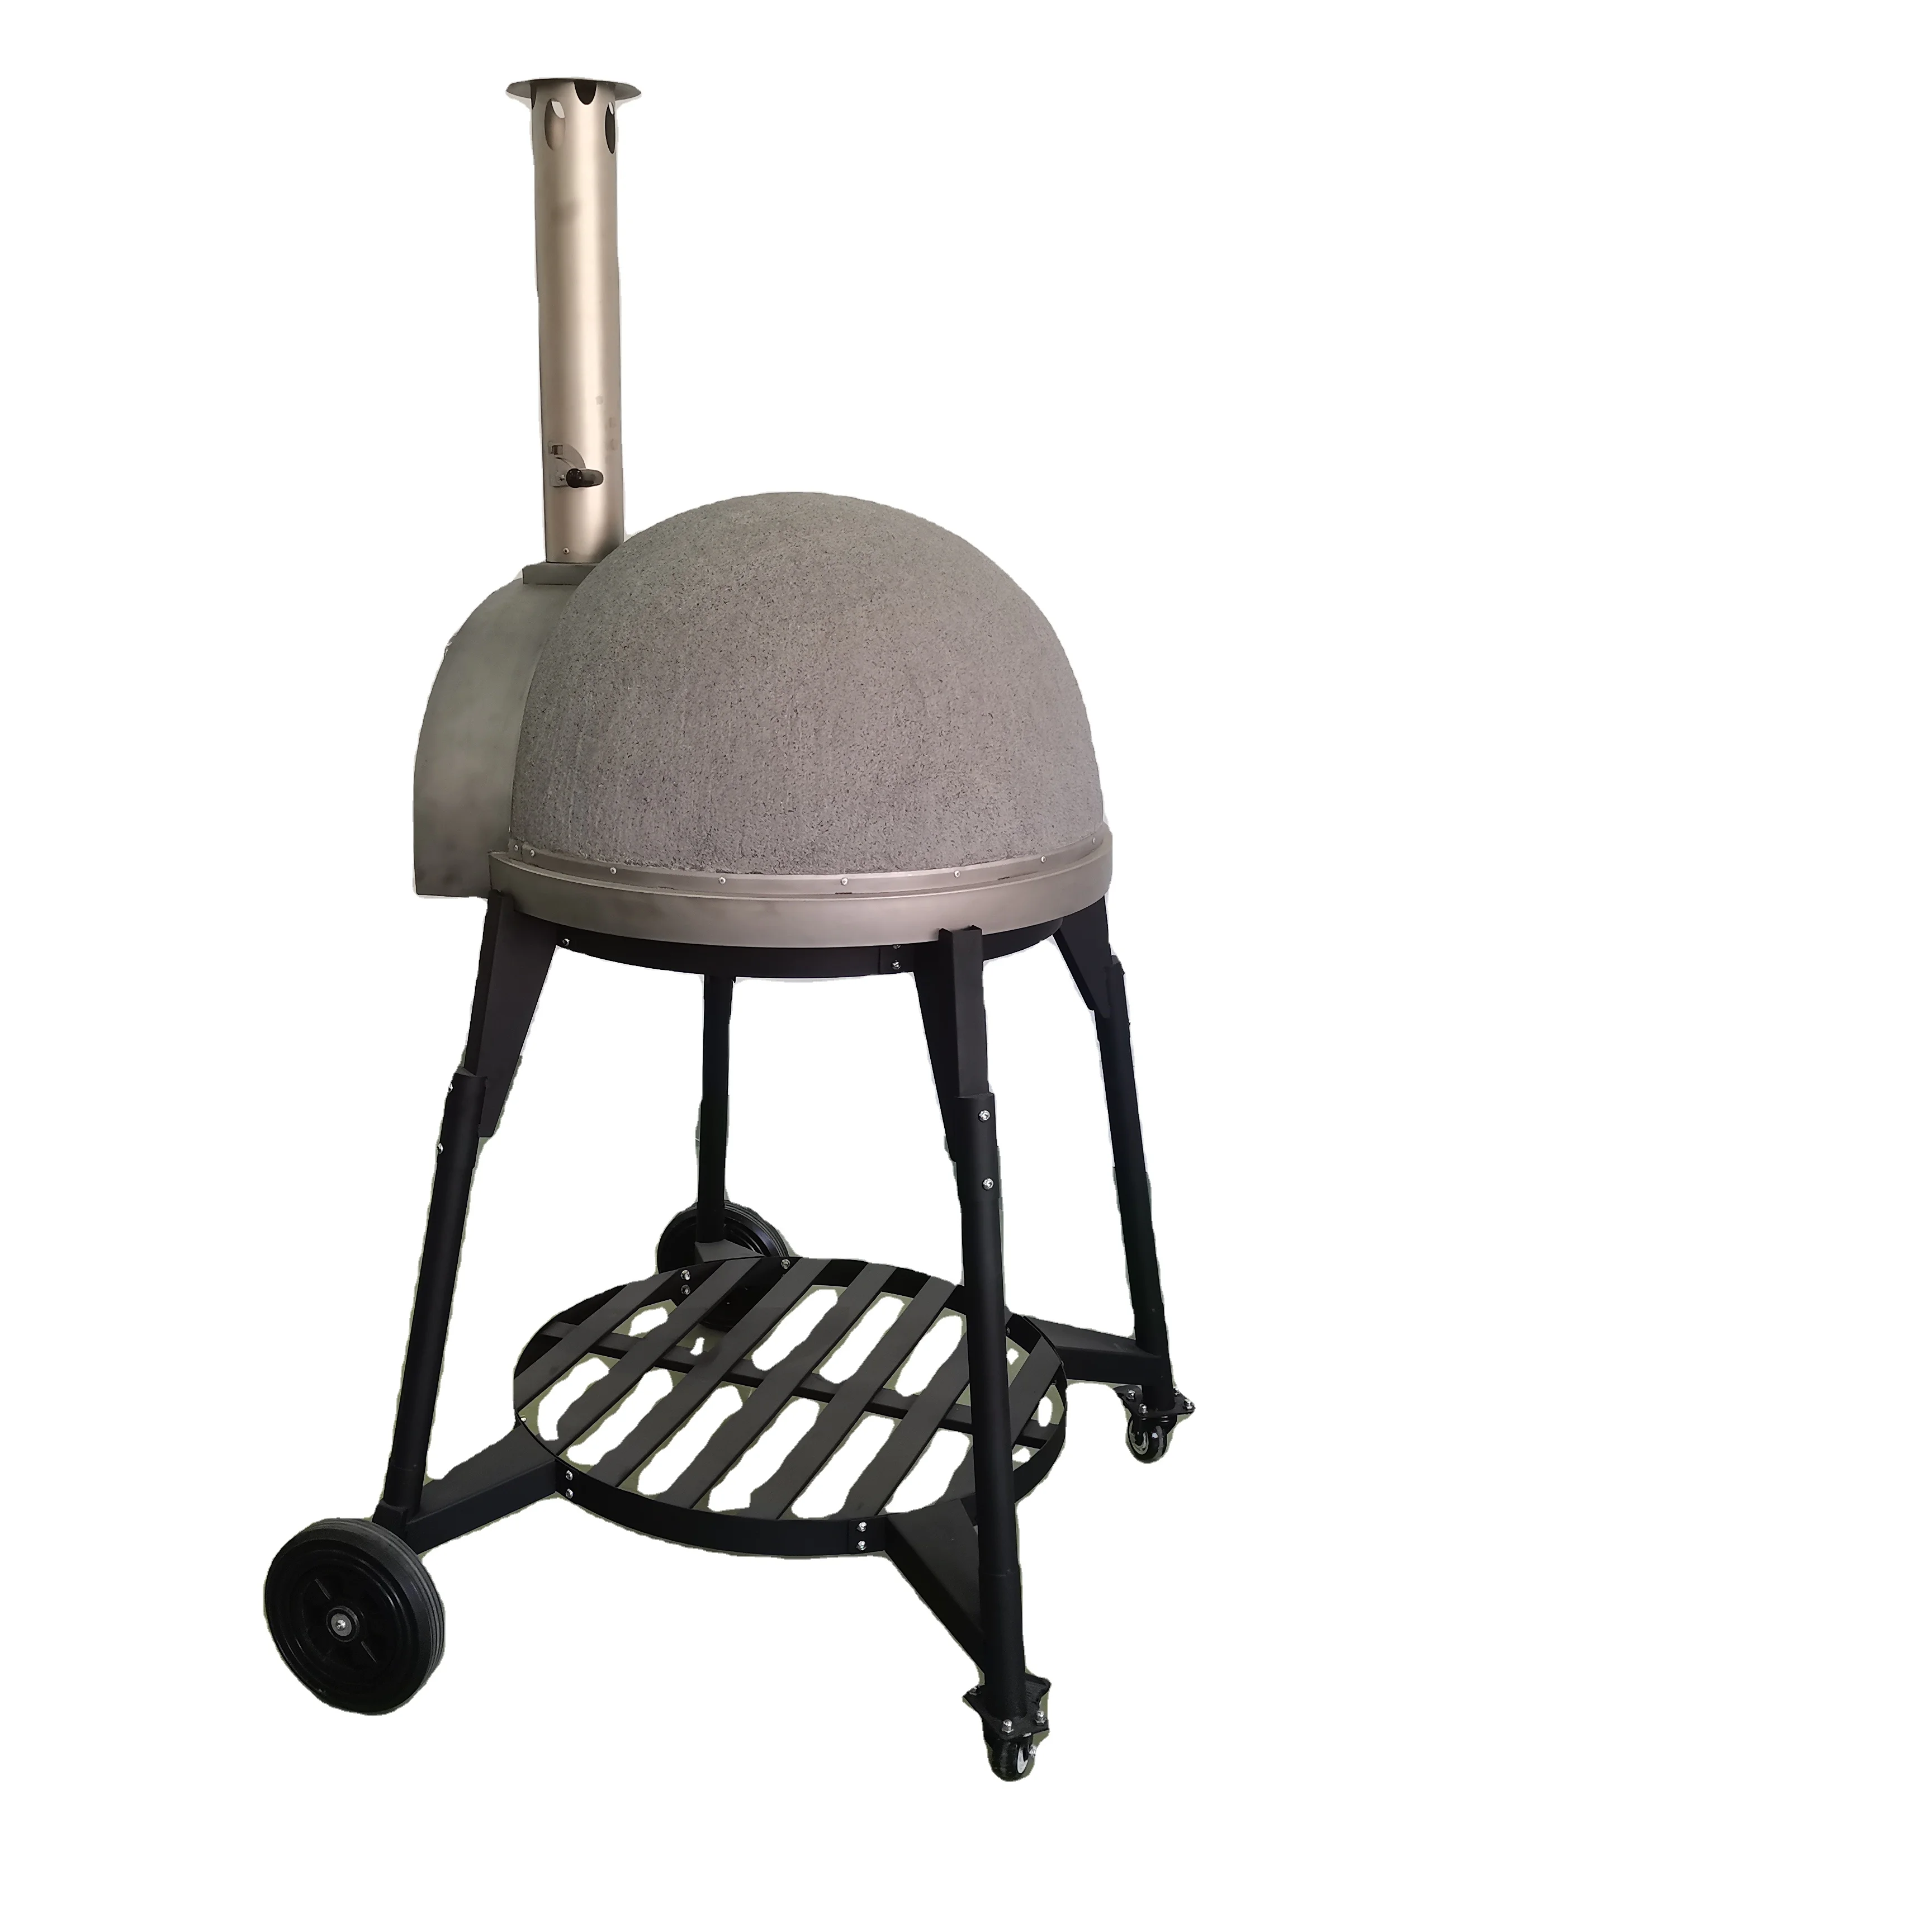 

Brick Clay Pizza Oven Commercial Electric Pizza Baking Stone Ovens Bread Making Machine Stove size 600cm model NL601R